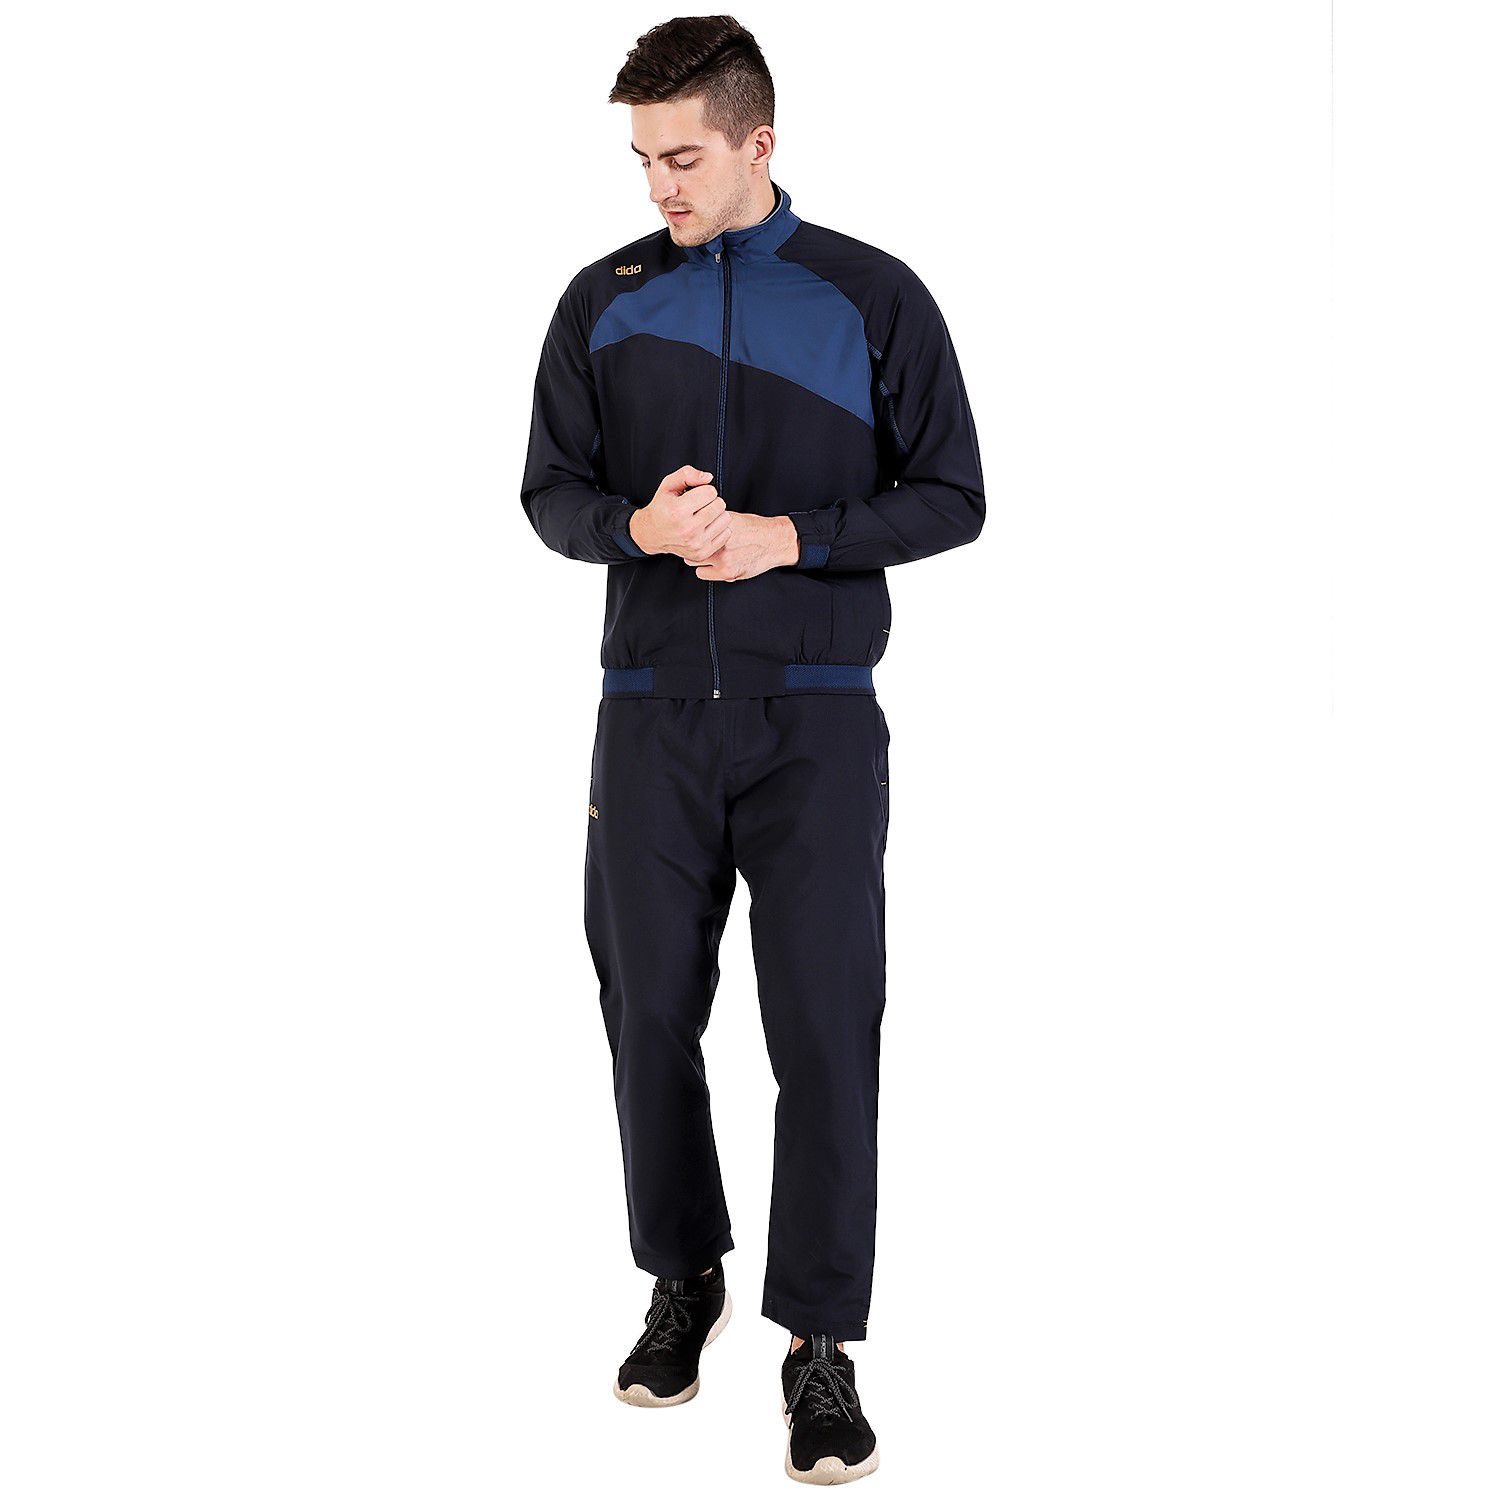 dida sports tracksuits